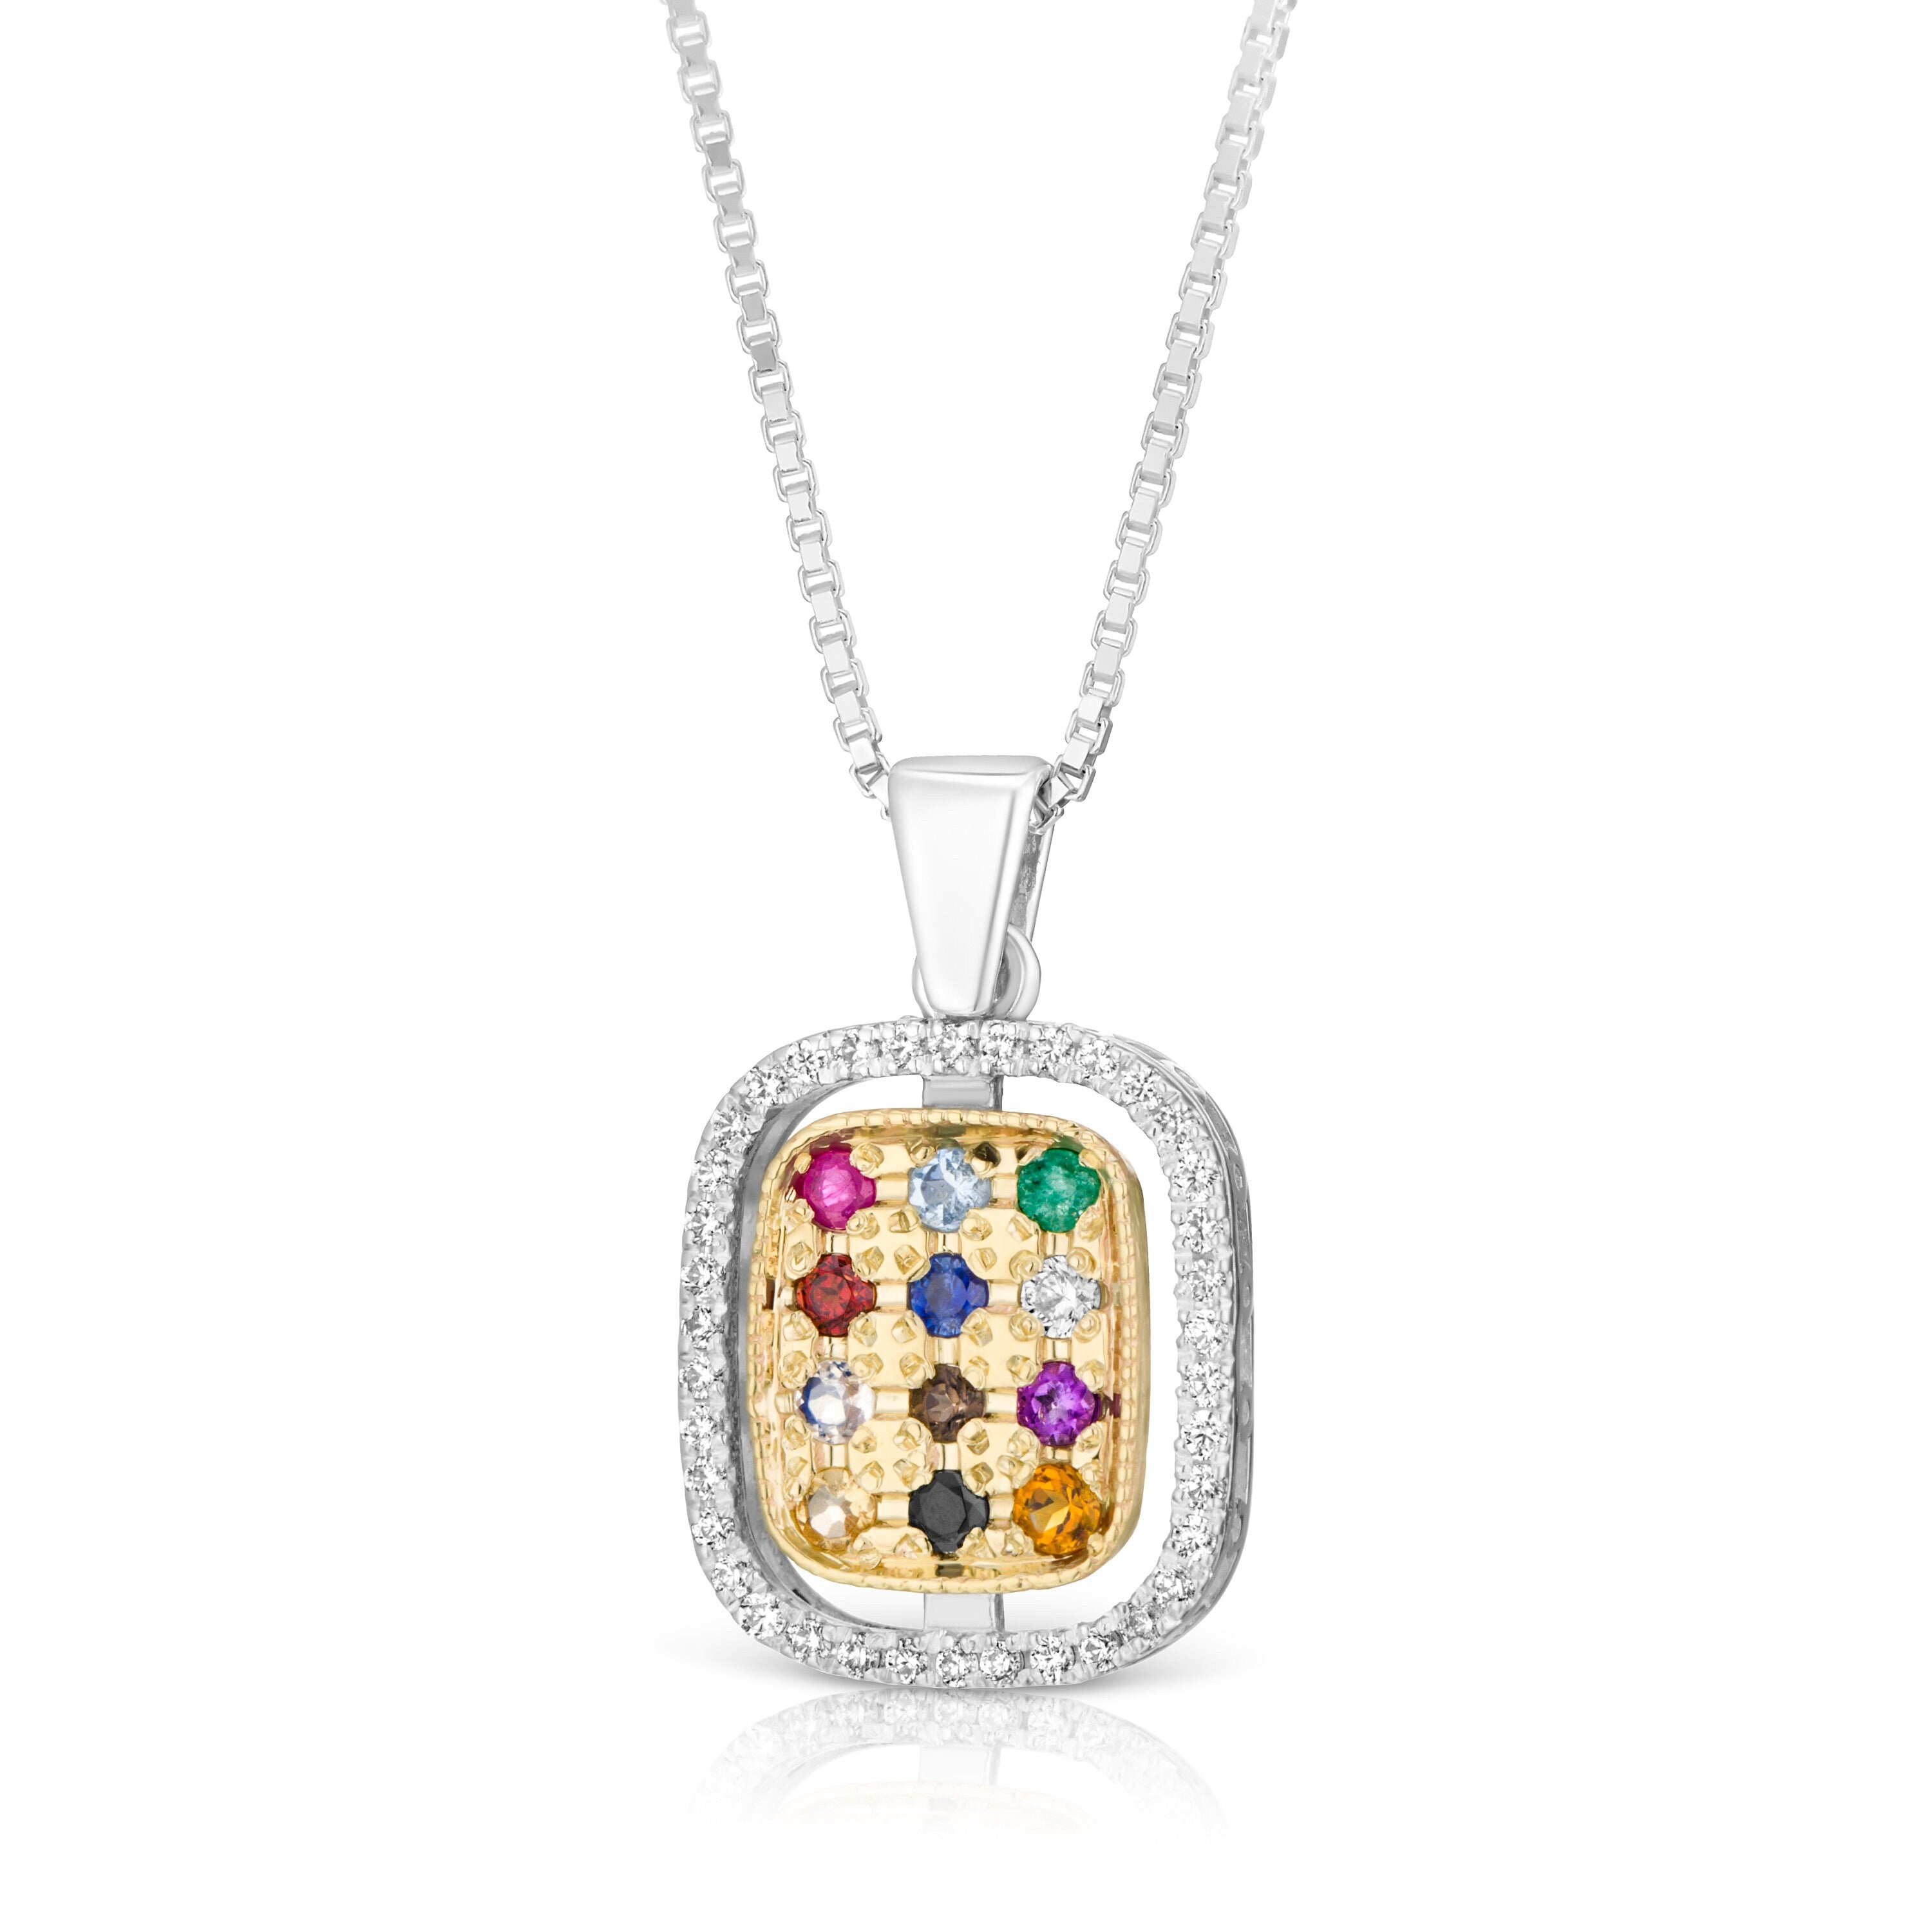 Hoshen Genuine Gemstones and Diamond Pendant Necklace: 925 Sterling Silver and 9K Gold Breastplate Stones Necklace | Anniversary Gift